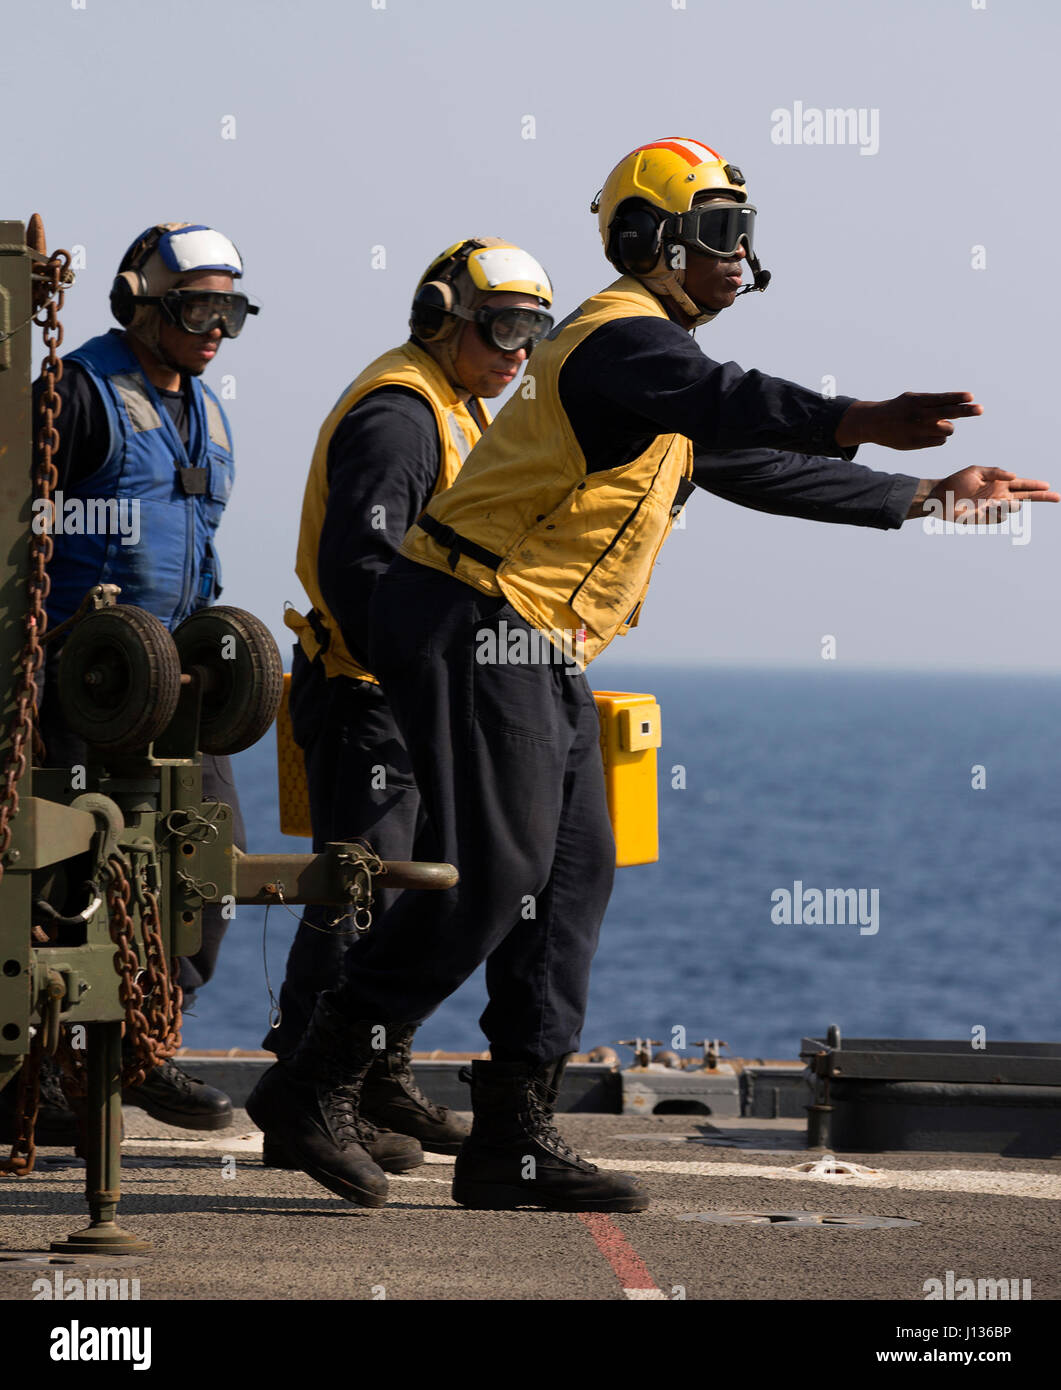 GULF OF ADEN (April 4, 2017) — U.S. Navy Seaman Aaron Brooks signals Sailors to chain down an MH-60S Sea Hawk assigned to the Desert Hawks of Helicopter Sea Combat Squadron (HSC) 26, after it lands on the flight deck of the amphibious dock landing ship USS Carter Hall (LSD 50) during flight operations April.  Carter Hall, part of the Bataan Amphibious Ready Group, is deployed to the U.S. 5th Fleet area of operations in support of maritime security operations designed to reassure allies and partners and preserve the freedom of navigation and the free flow of commerce in the region . (U.S. Marin Stock Photo